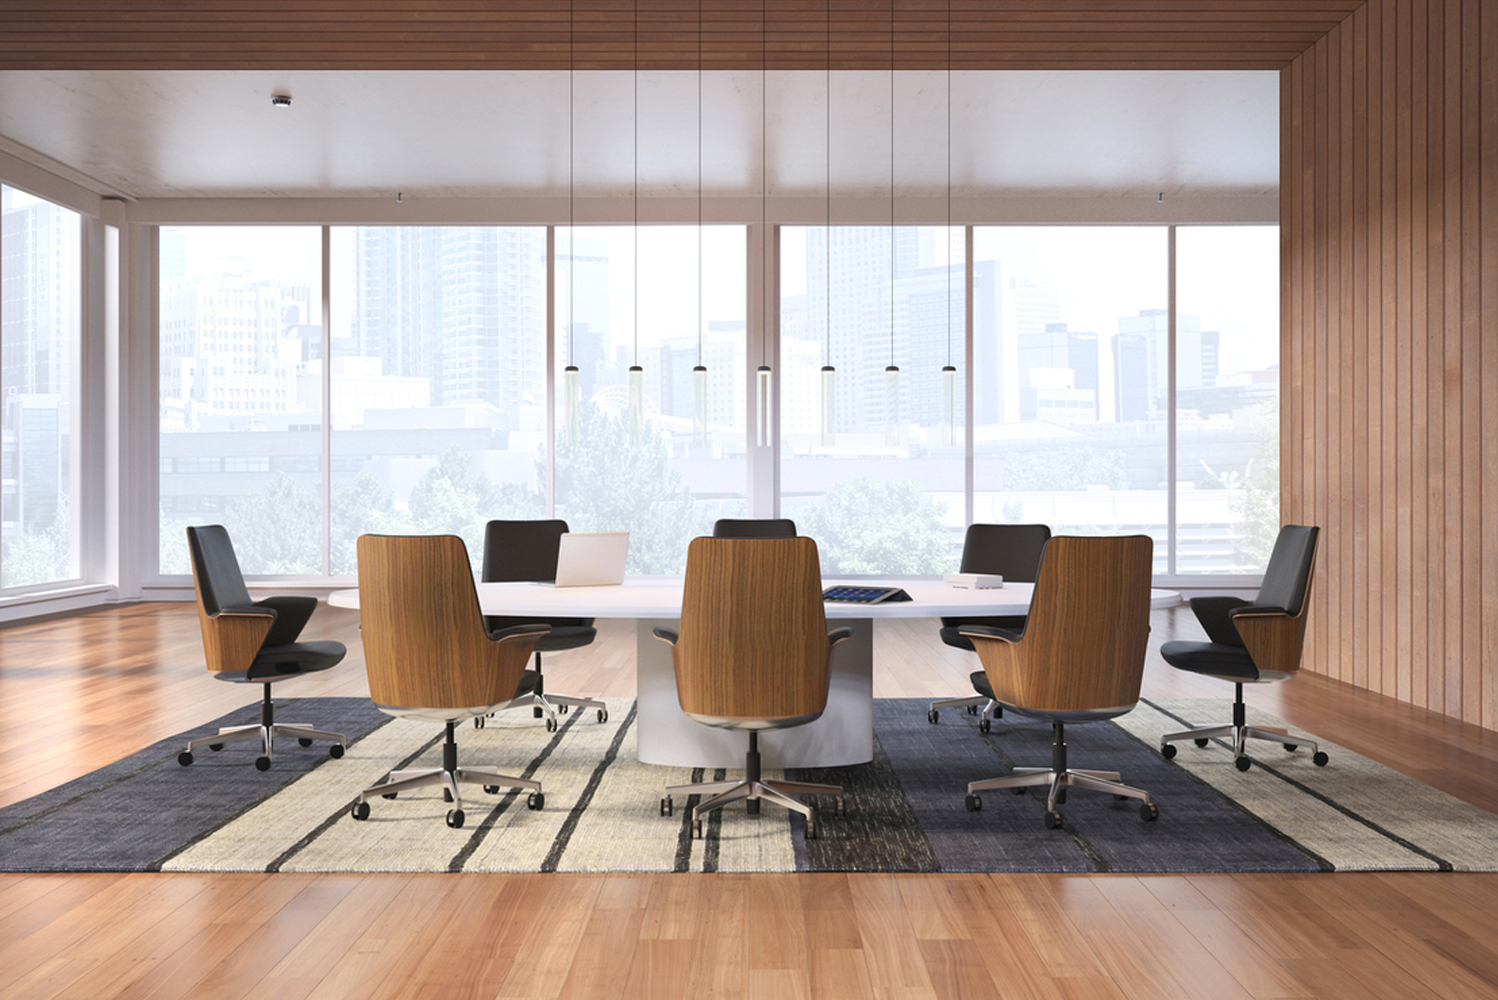 Humanscale launched its first executive boardroom seating product Summa 